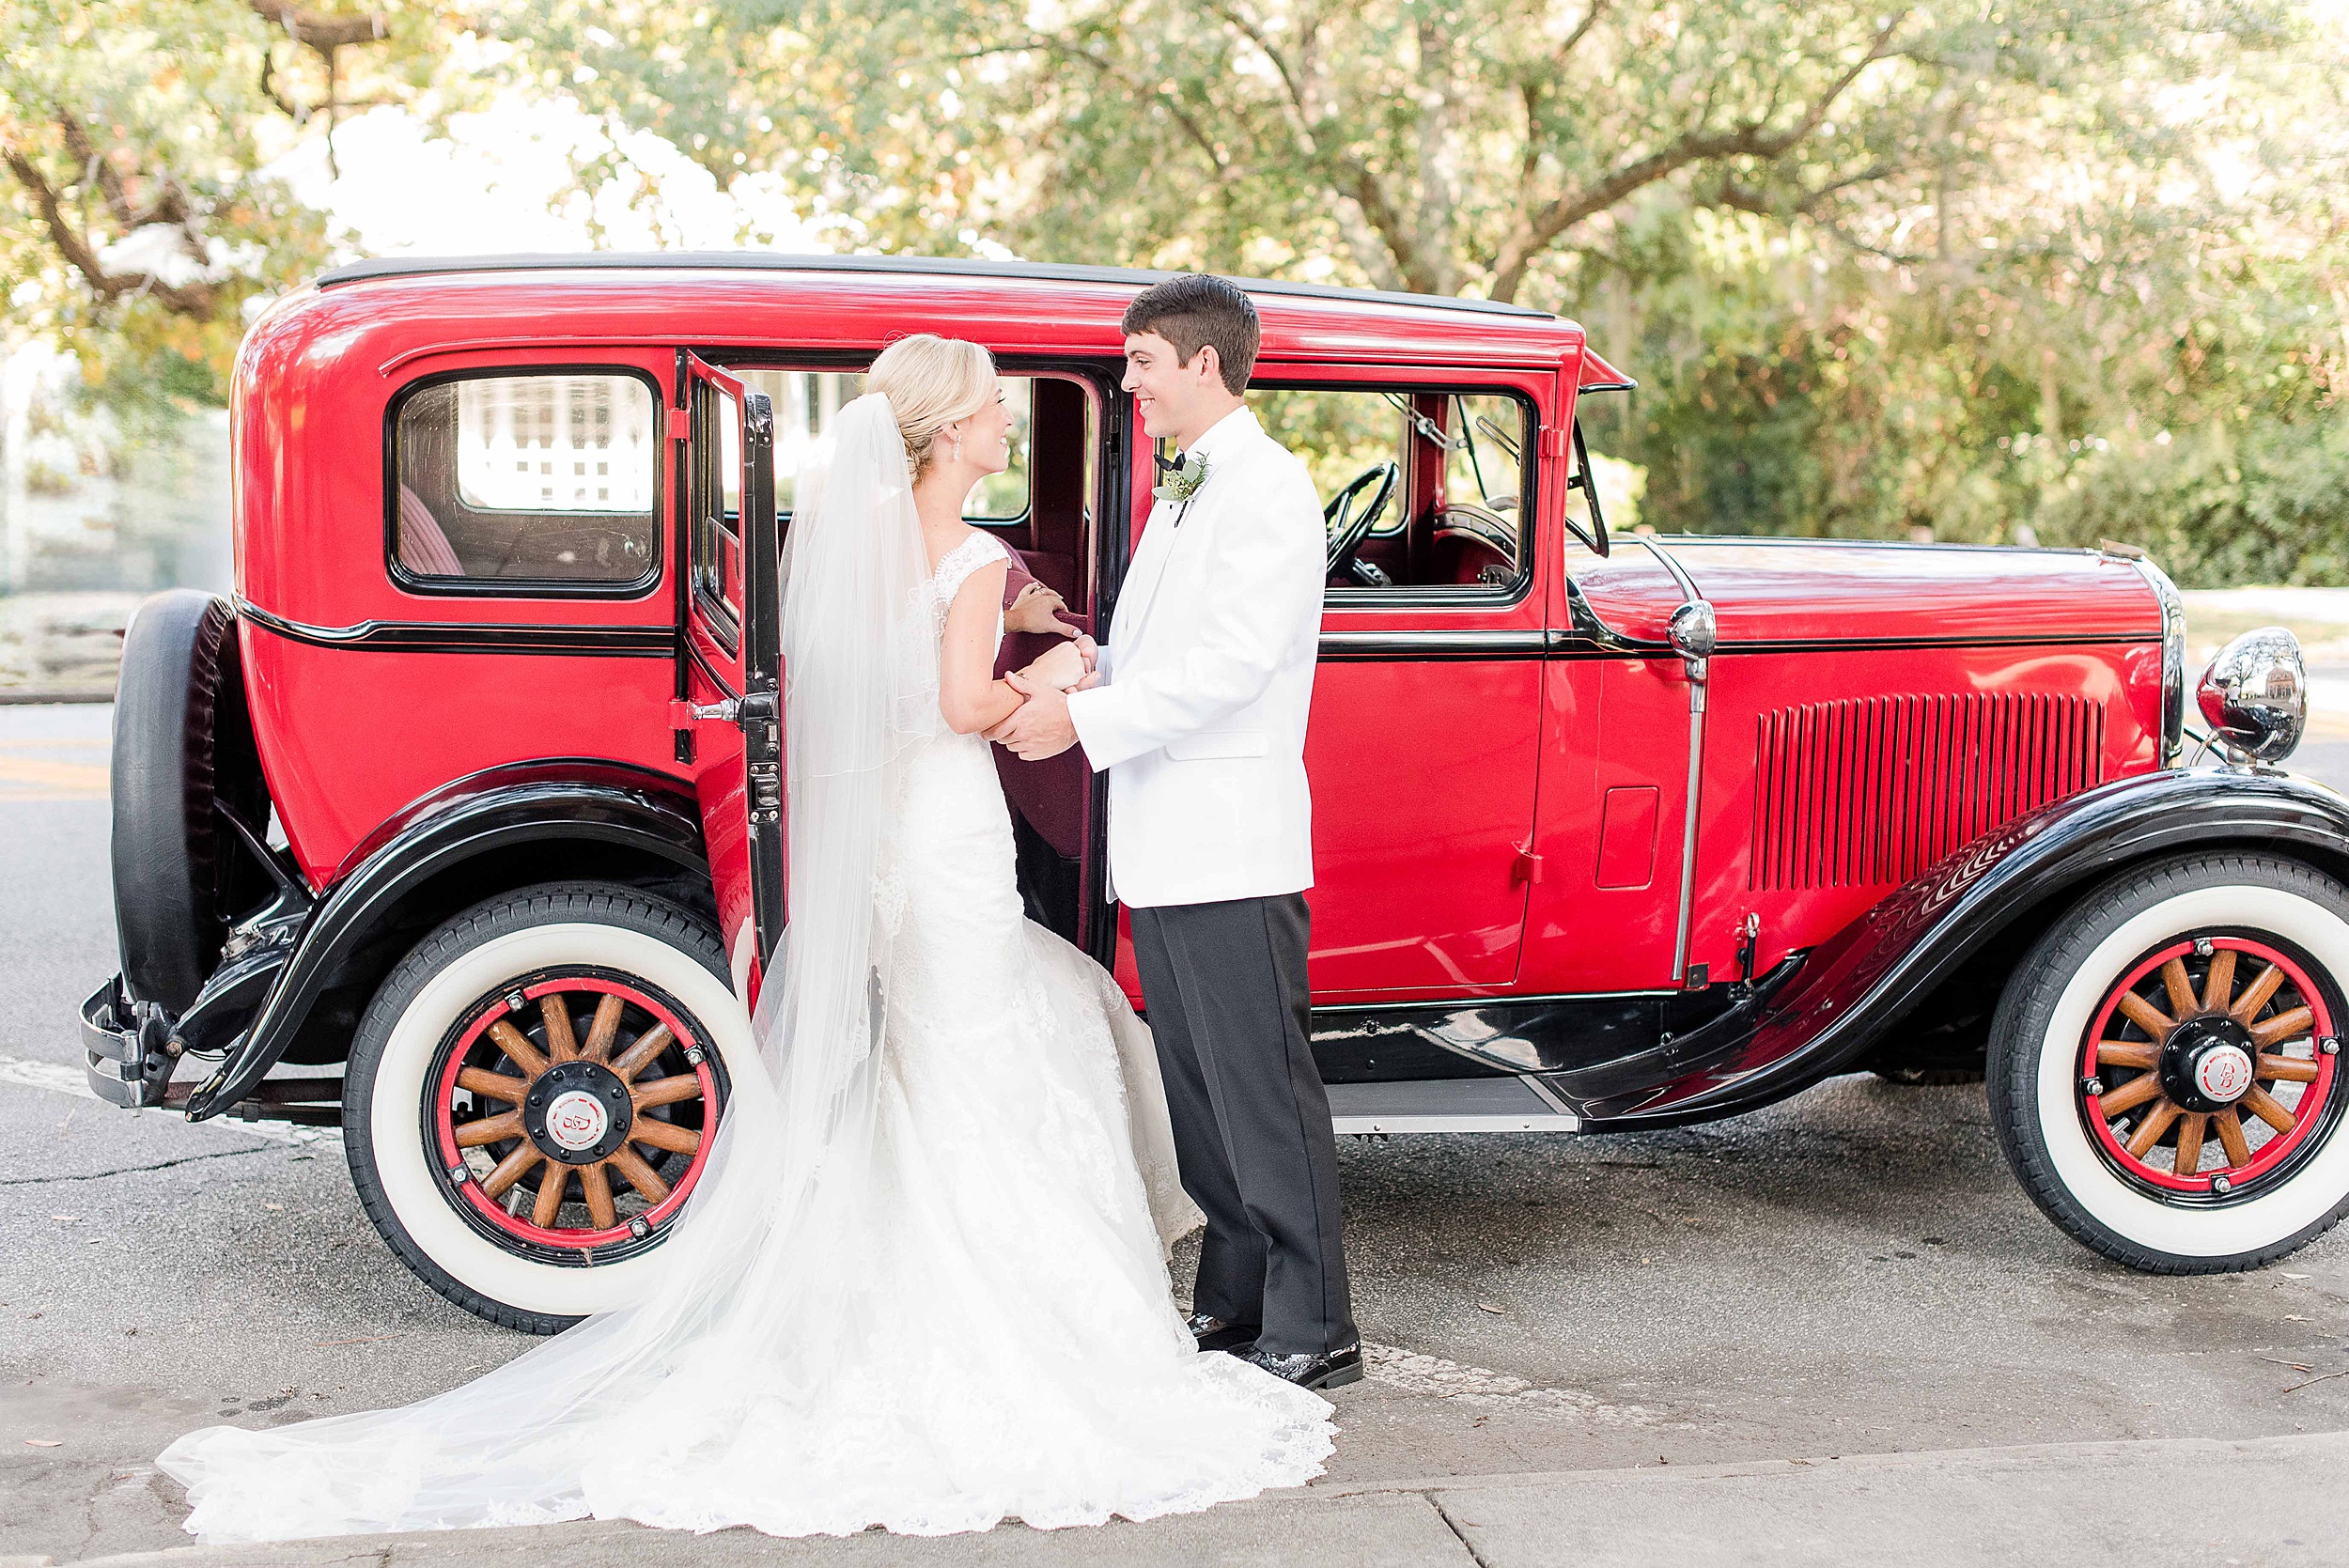 A groom in a white suit helps his bride into a red vintage car at their Manor Country Club Wedding